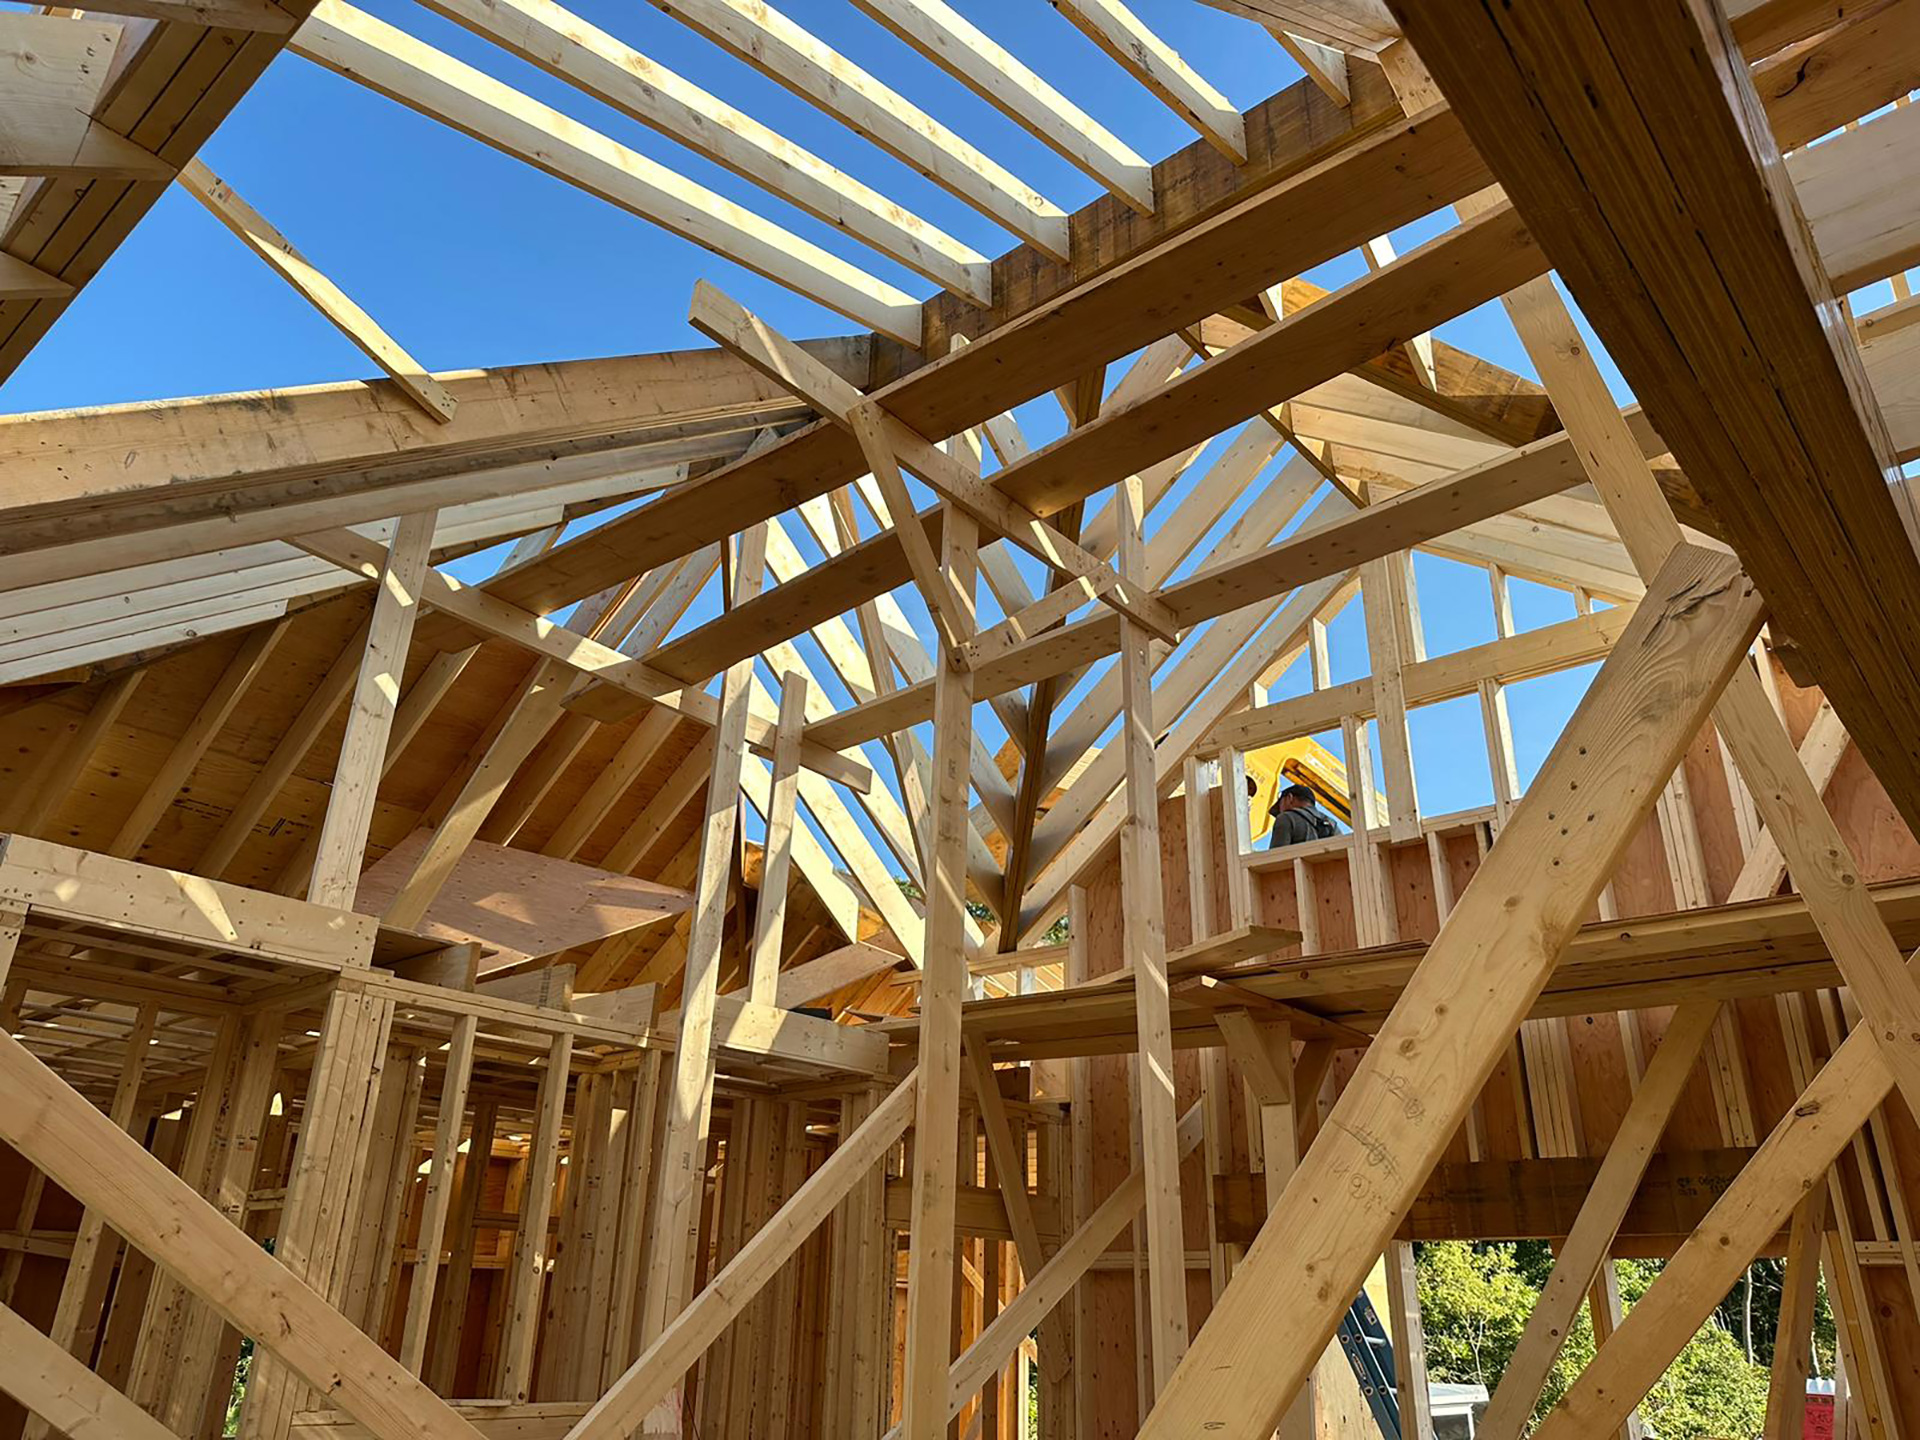 Why Home Construction Is on the Rise